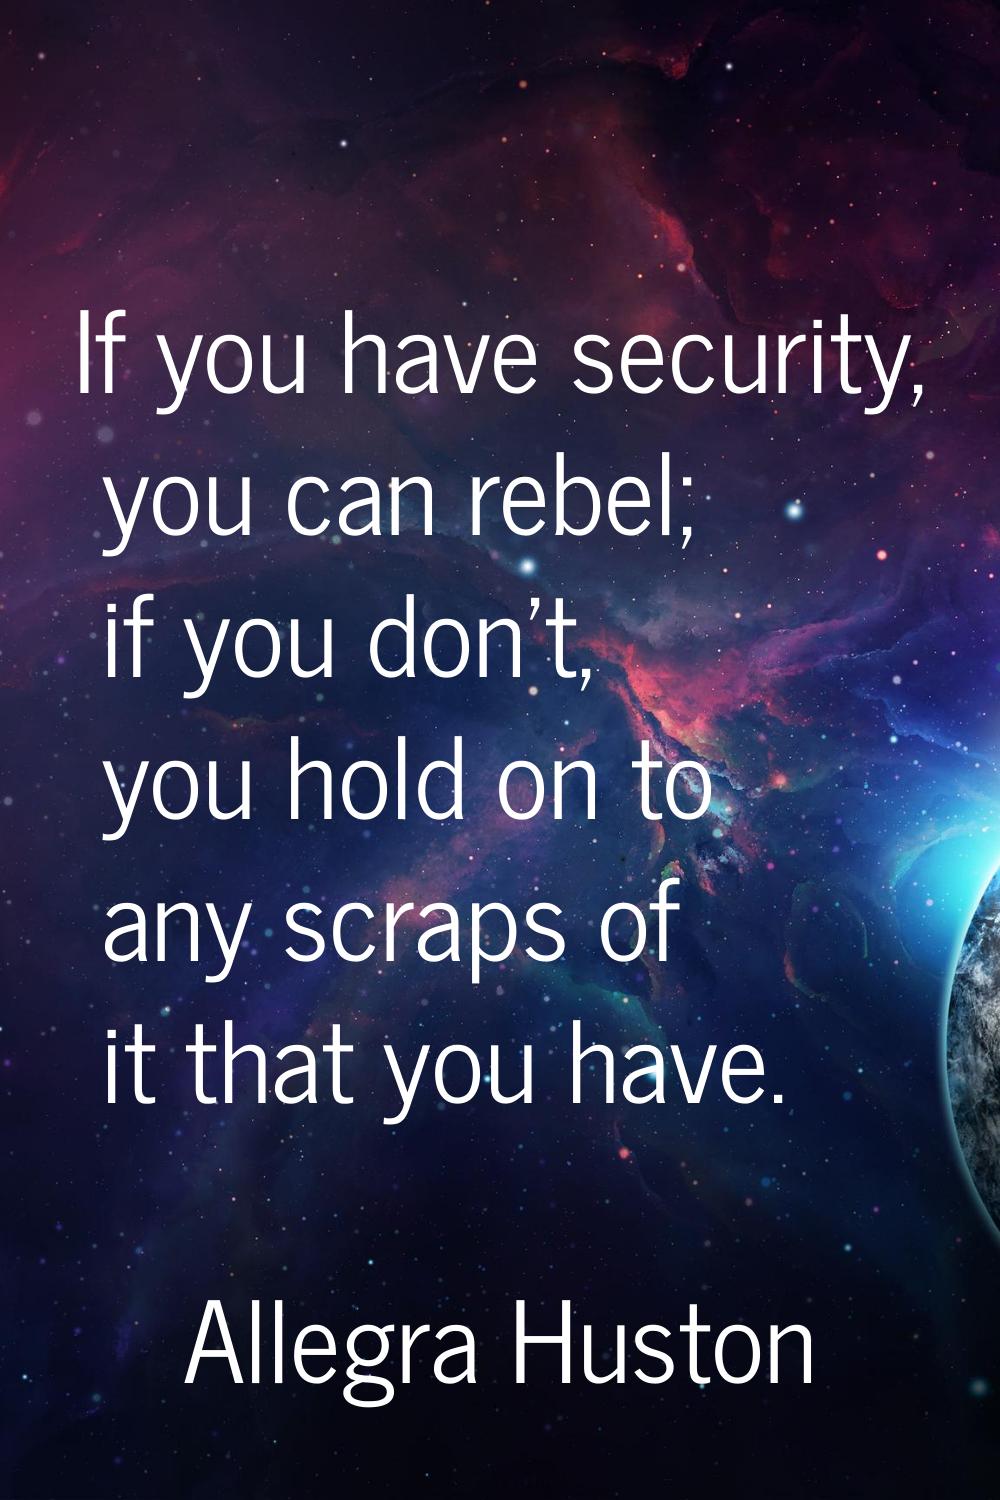 If you have security, you can rebel; if you don't, you hold on to any scraps of it that you have.